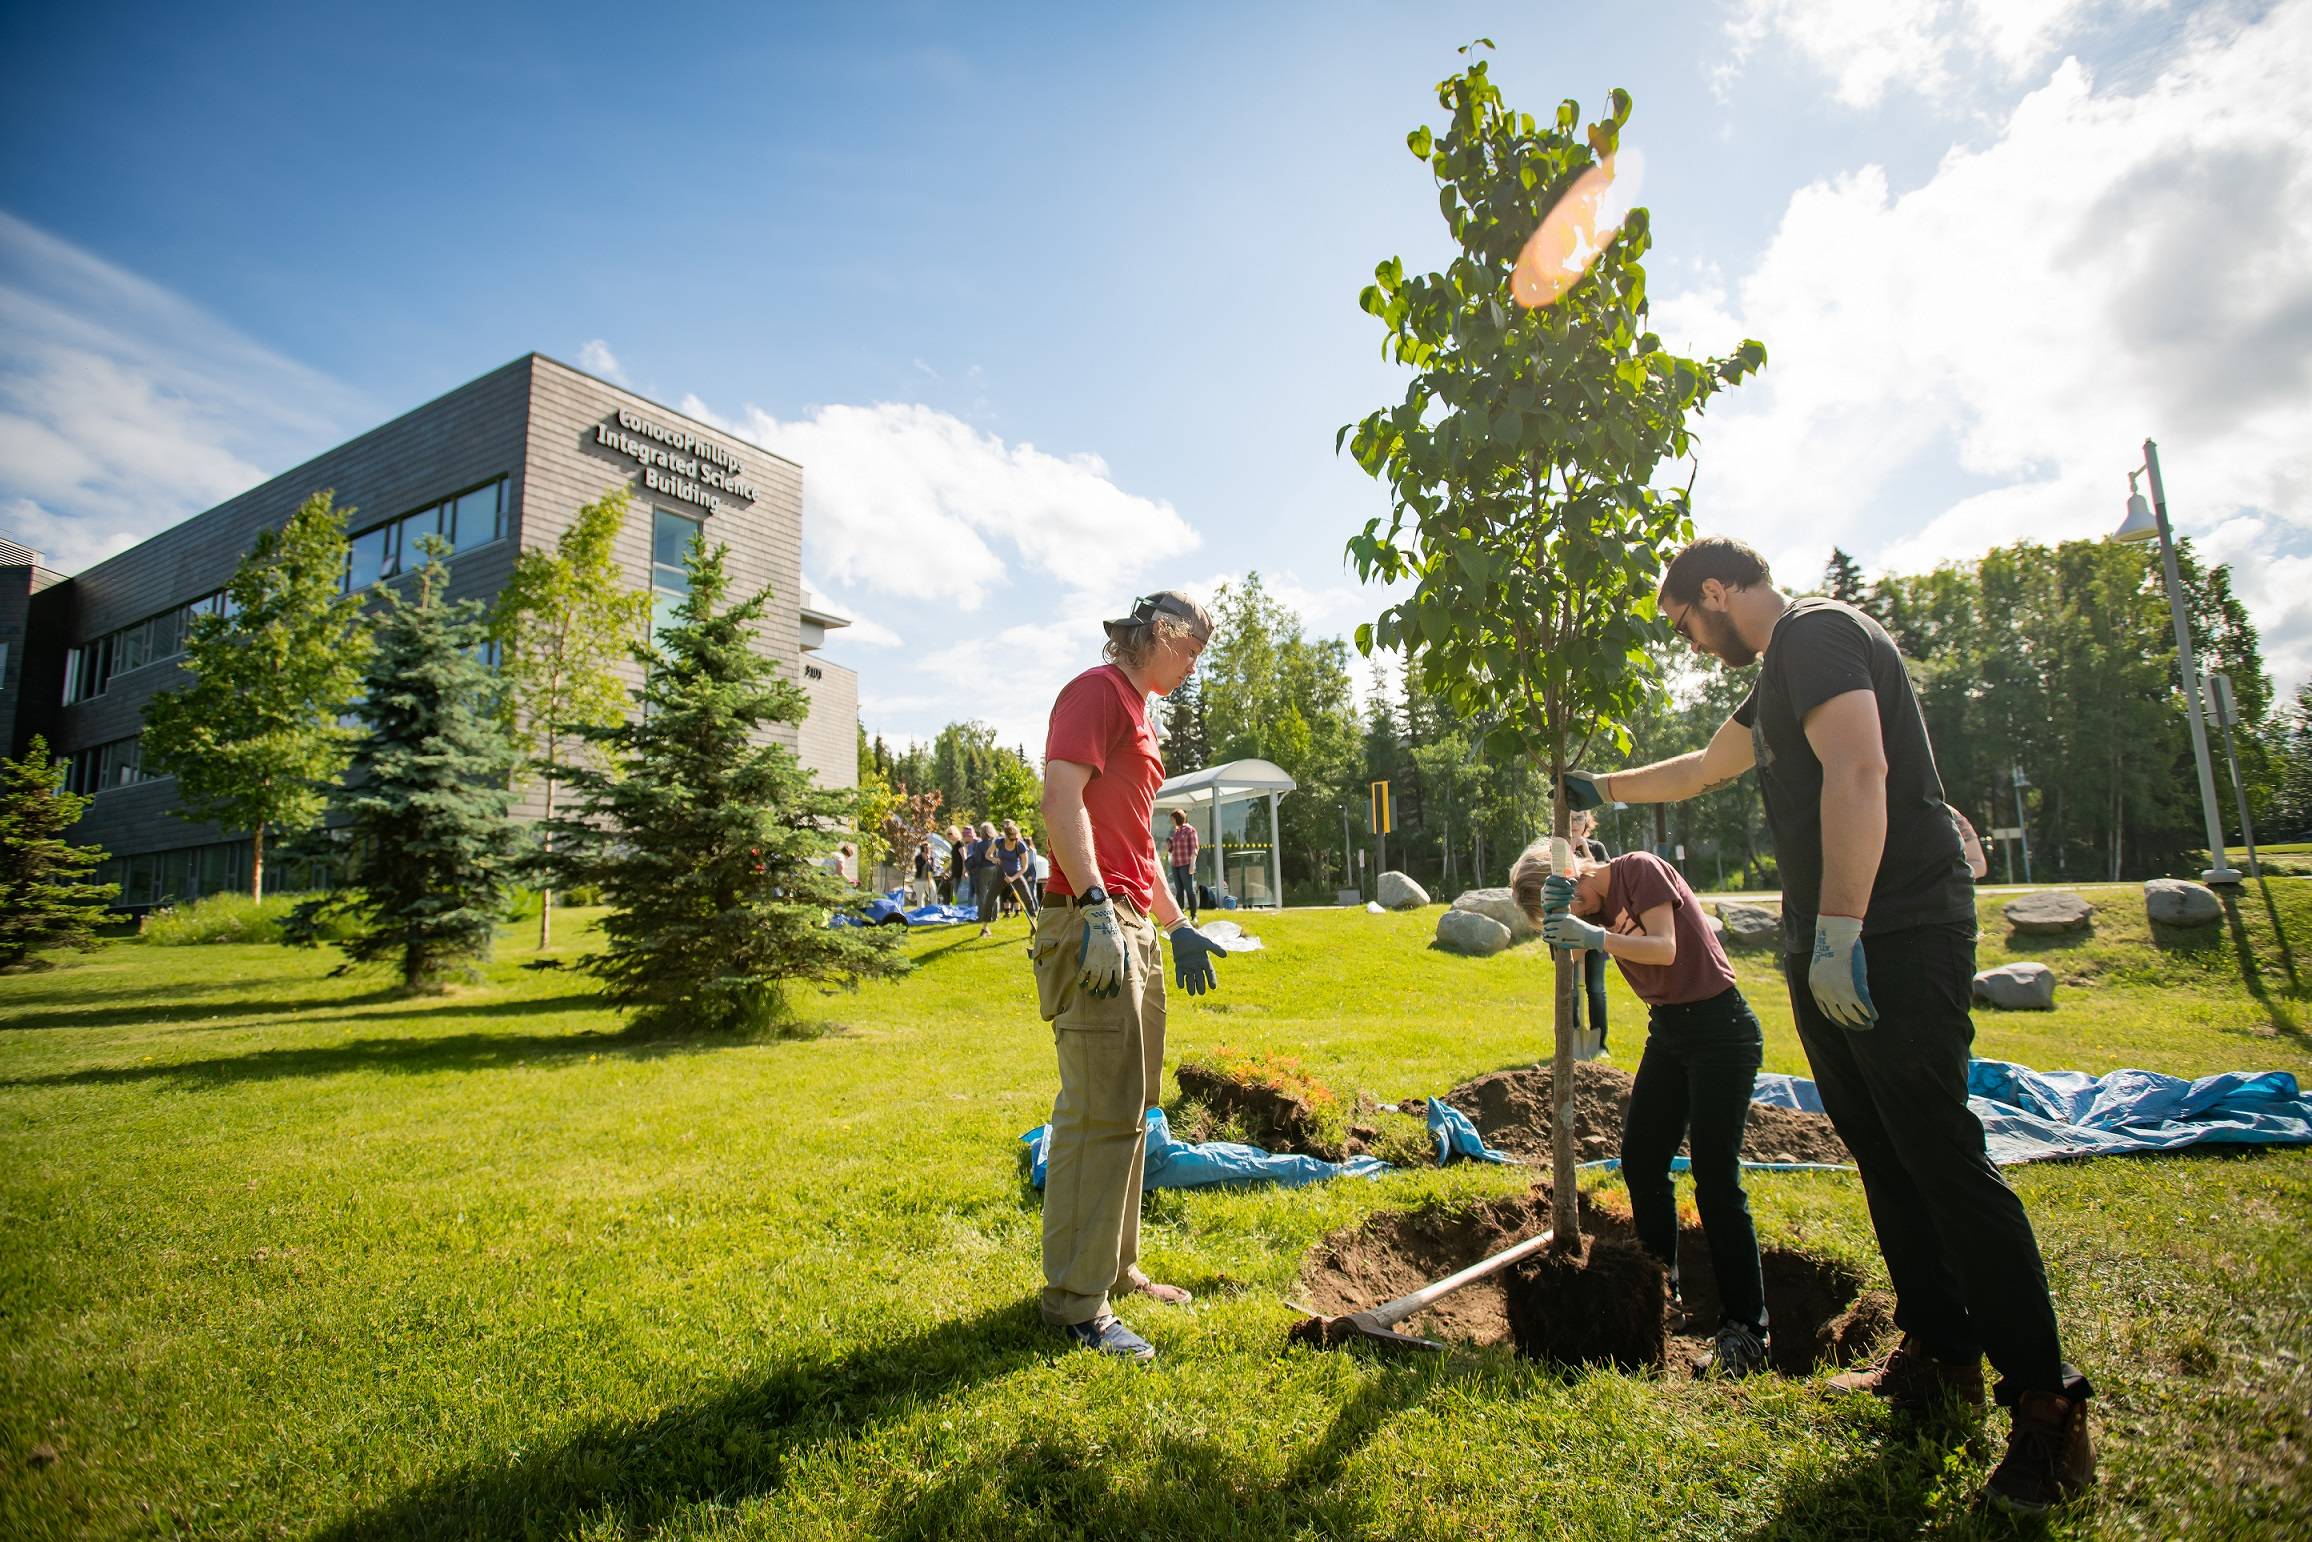 Students planting a tree in a sunny field